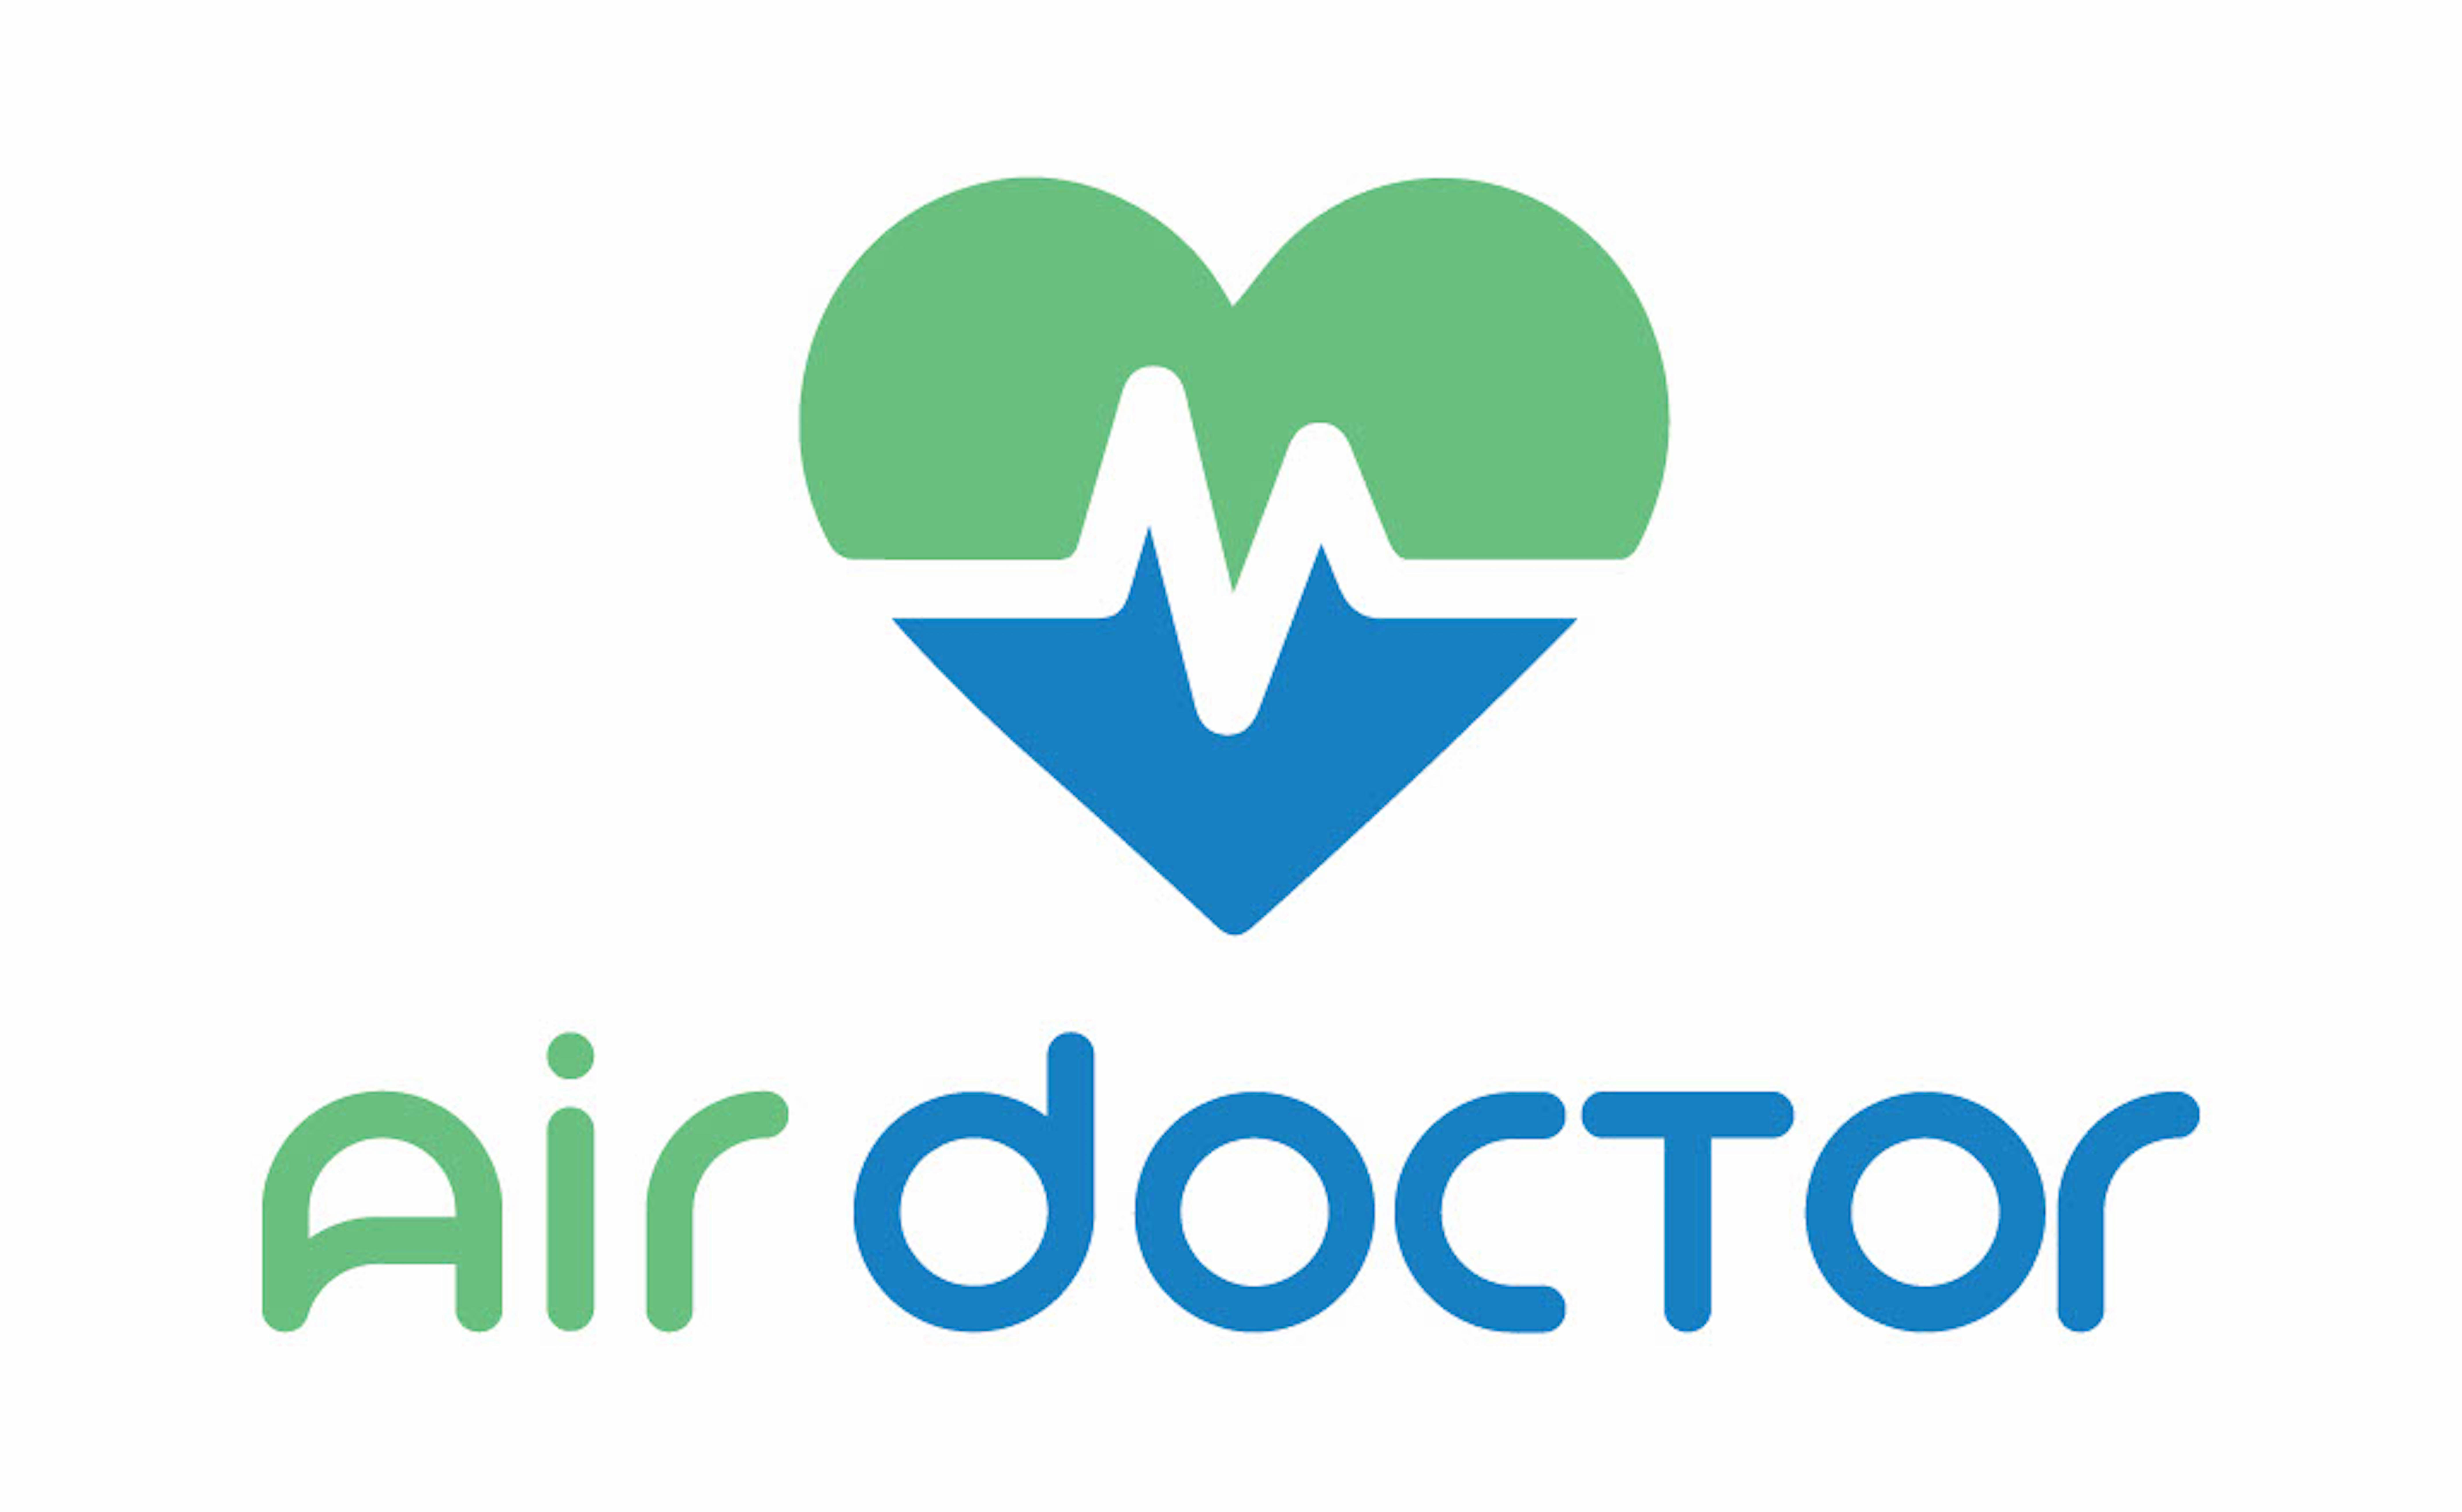 Air Doctor – Bridging the gap between people and local doctors